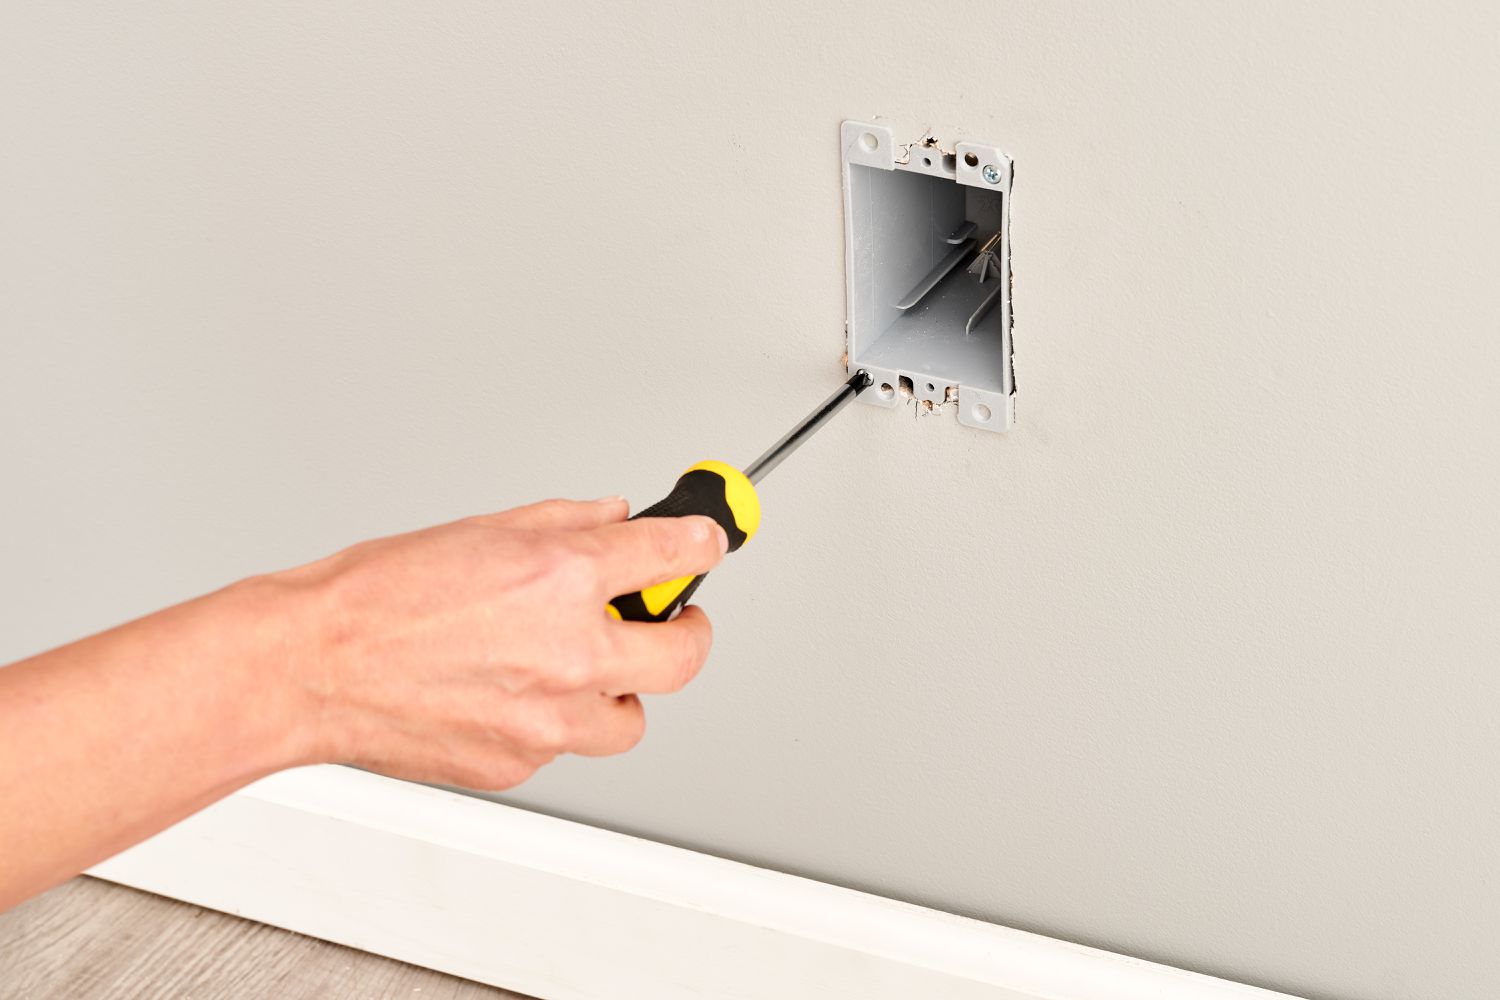 How To Cut Drywall To Install An Electrical Box